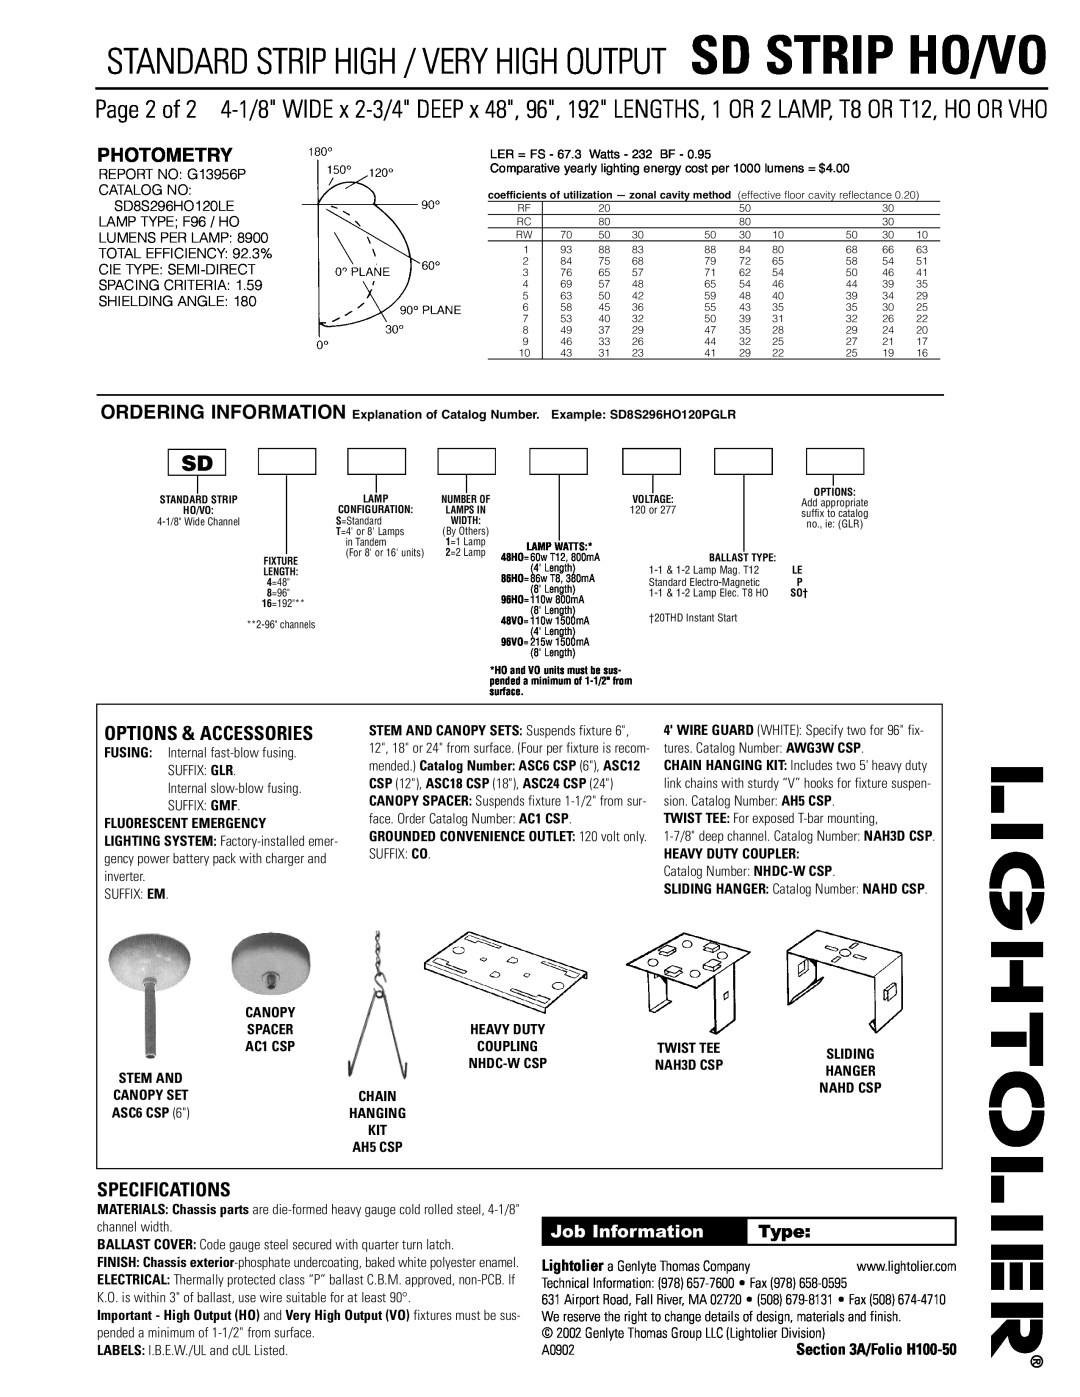 Lightolier SD STRIP HO-VO Photometry, Specifications, Options & Accessories, Job Information, Type, Fluorescent Emergency 